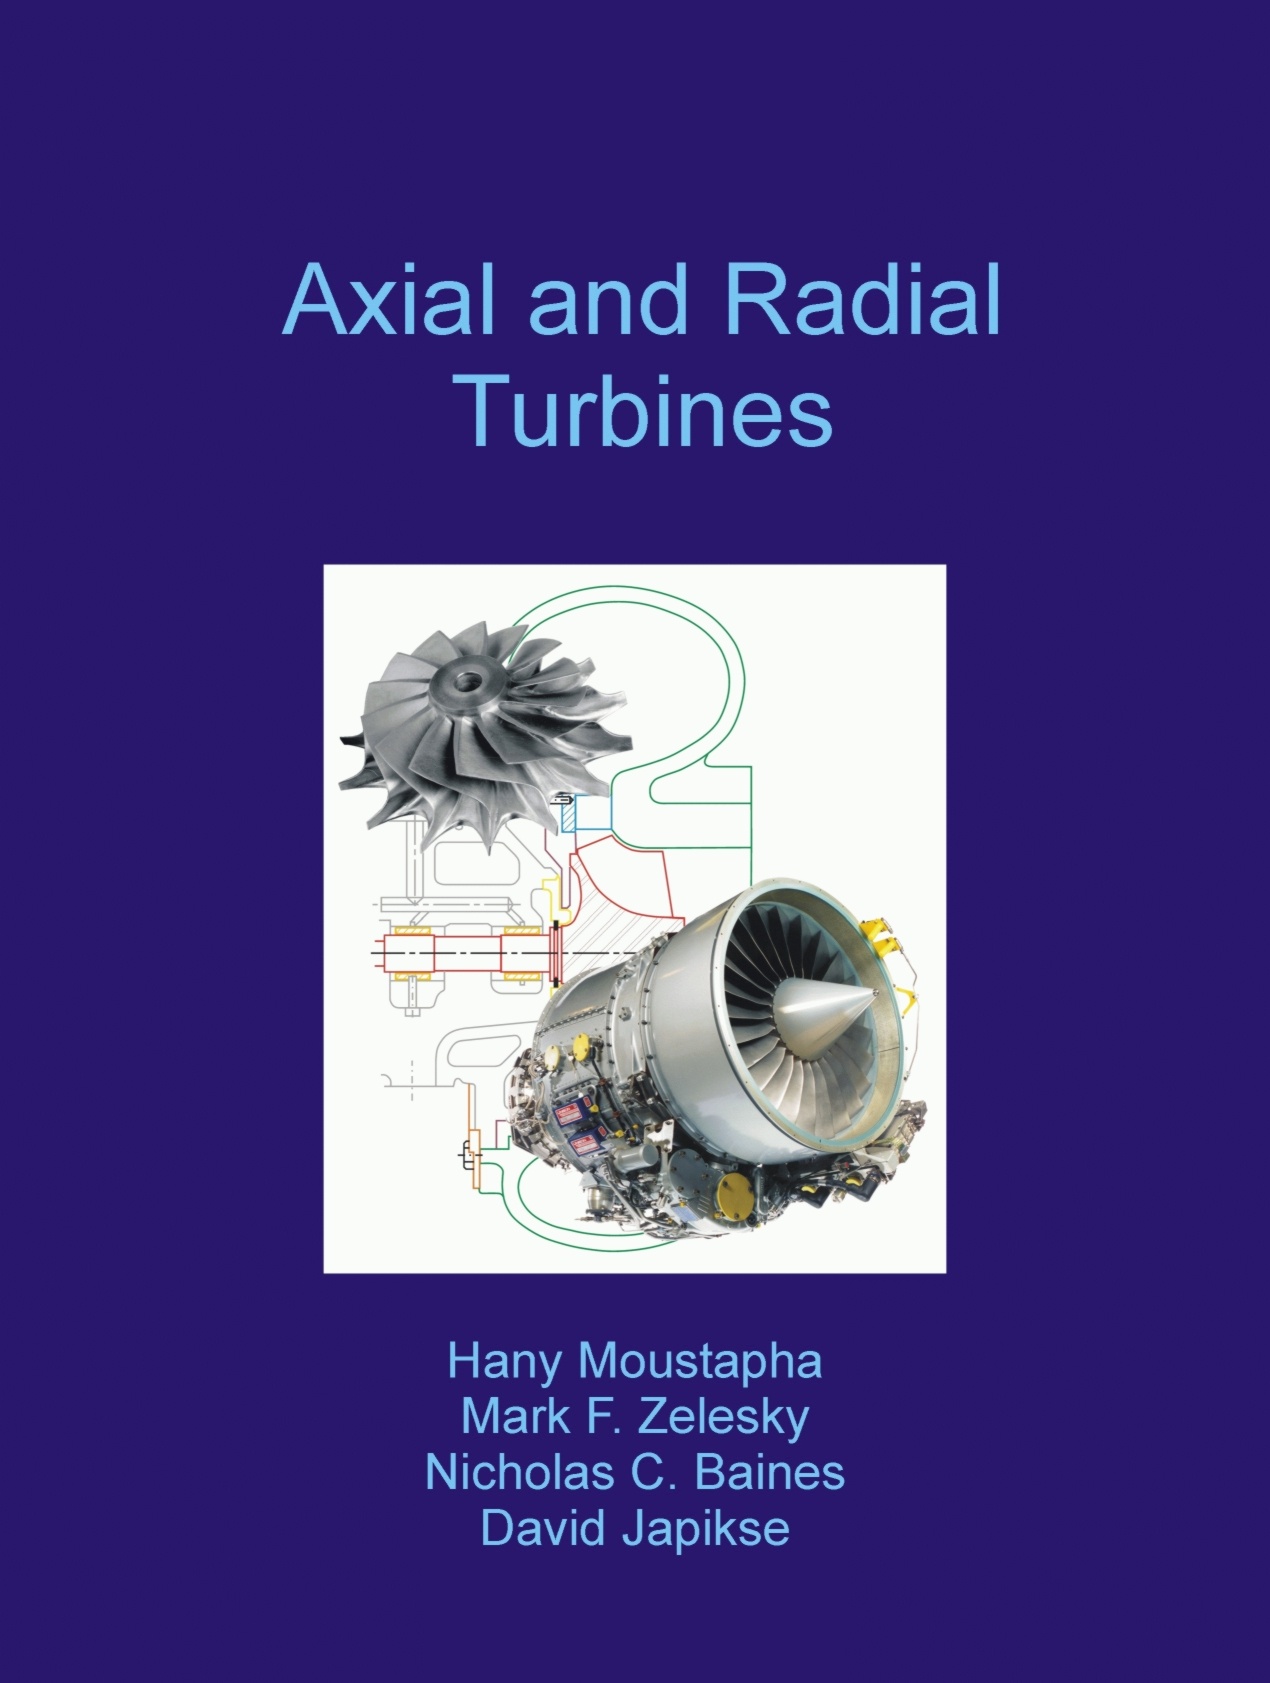 Axial_and_Radial_Turbines_xl